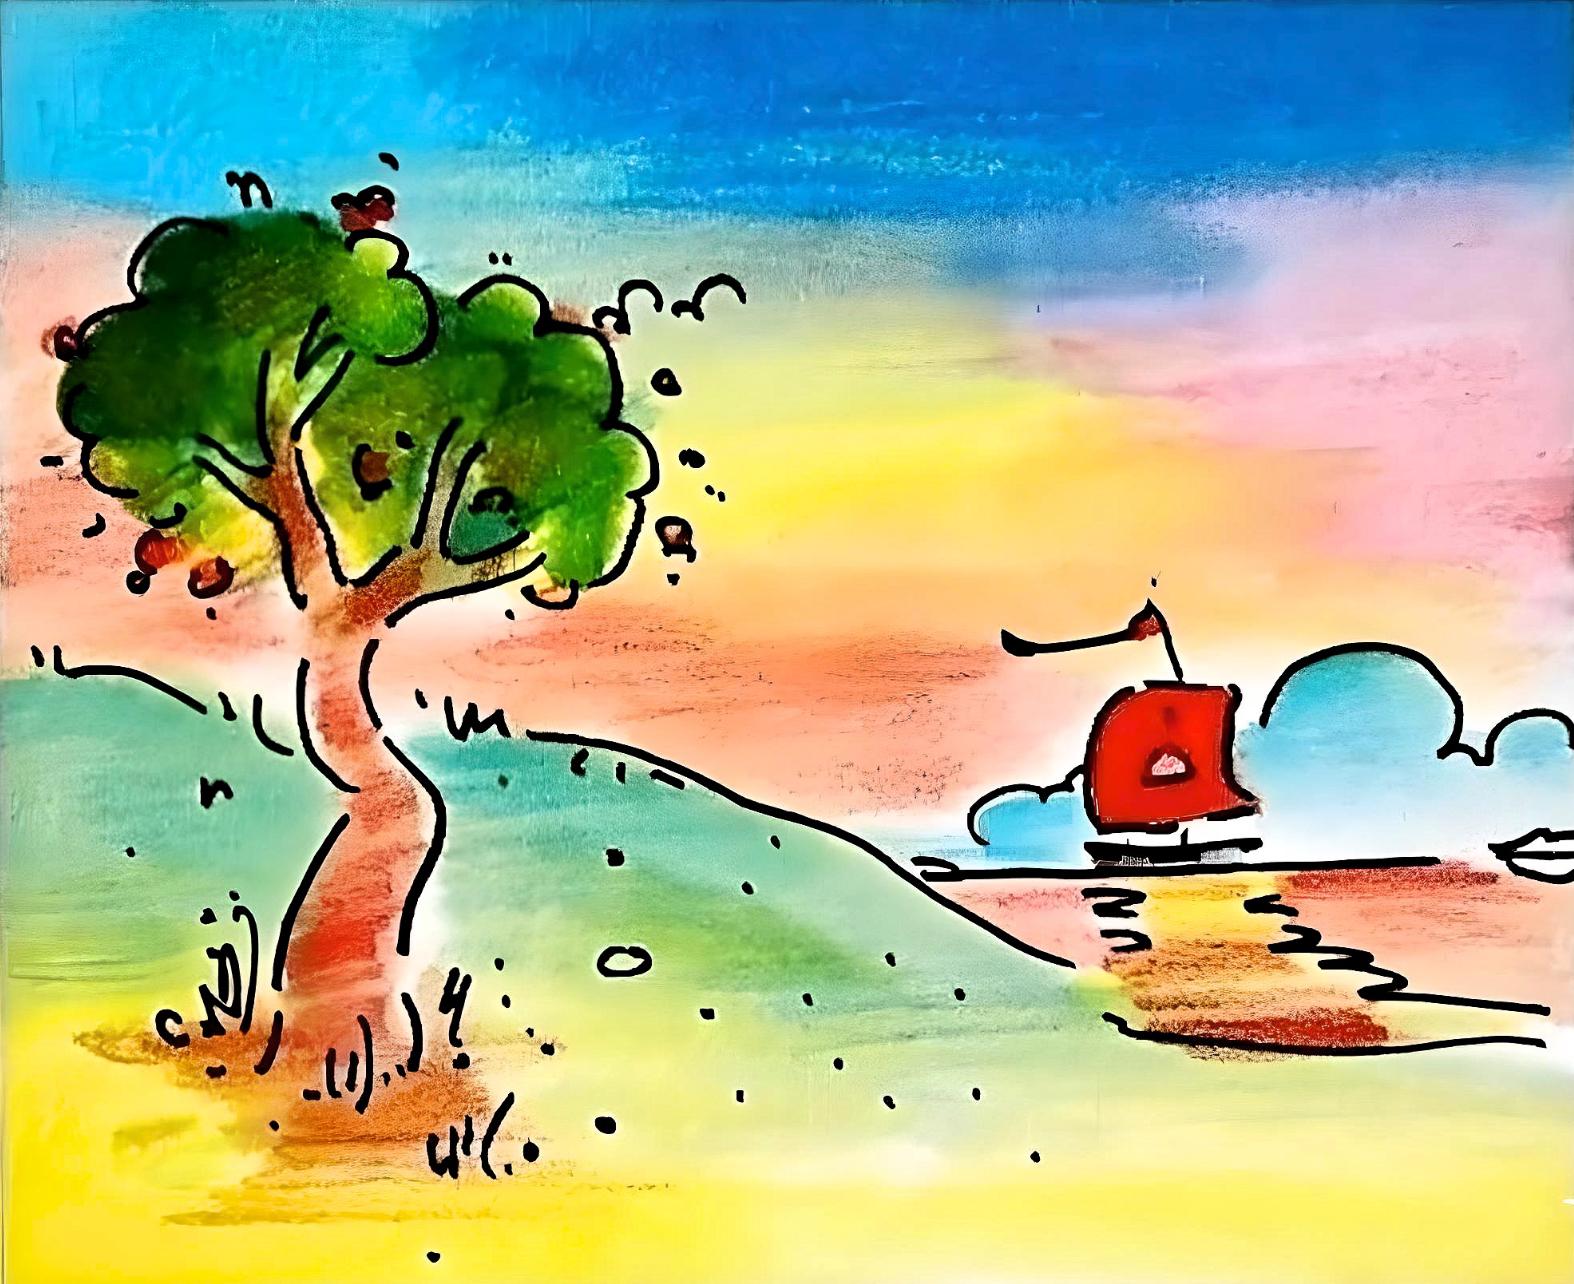 Artist: Peter Max (1937)
Title: Quiet Lake
Year: 2000
Edition: 306/500, plus proofs
Medium: Lithograph on Lustro Saxony paper
Size: 7.25 x 8.5 inches
Condition: Excellent
Inscription: Signed and numbered by the artist.
Notes: Published by Via Max.